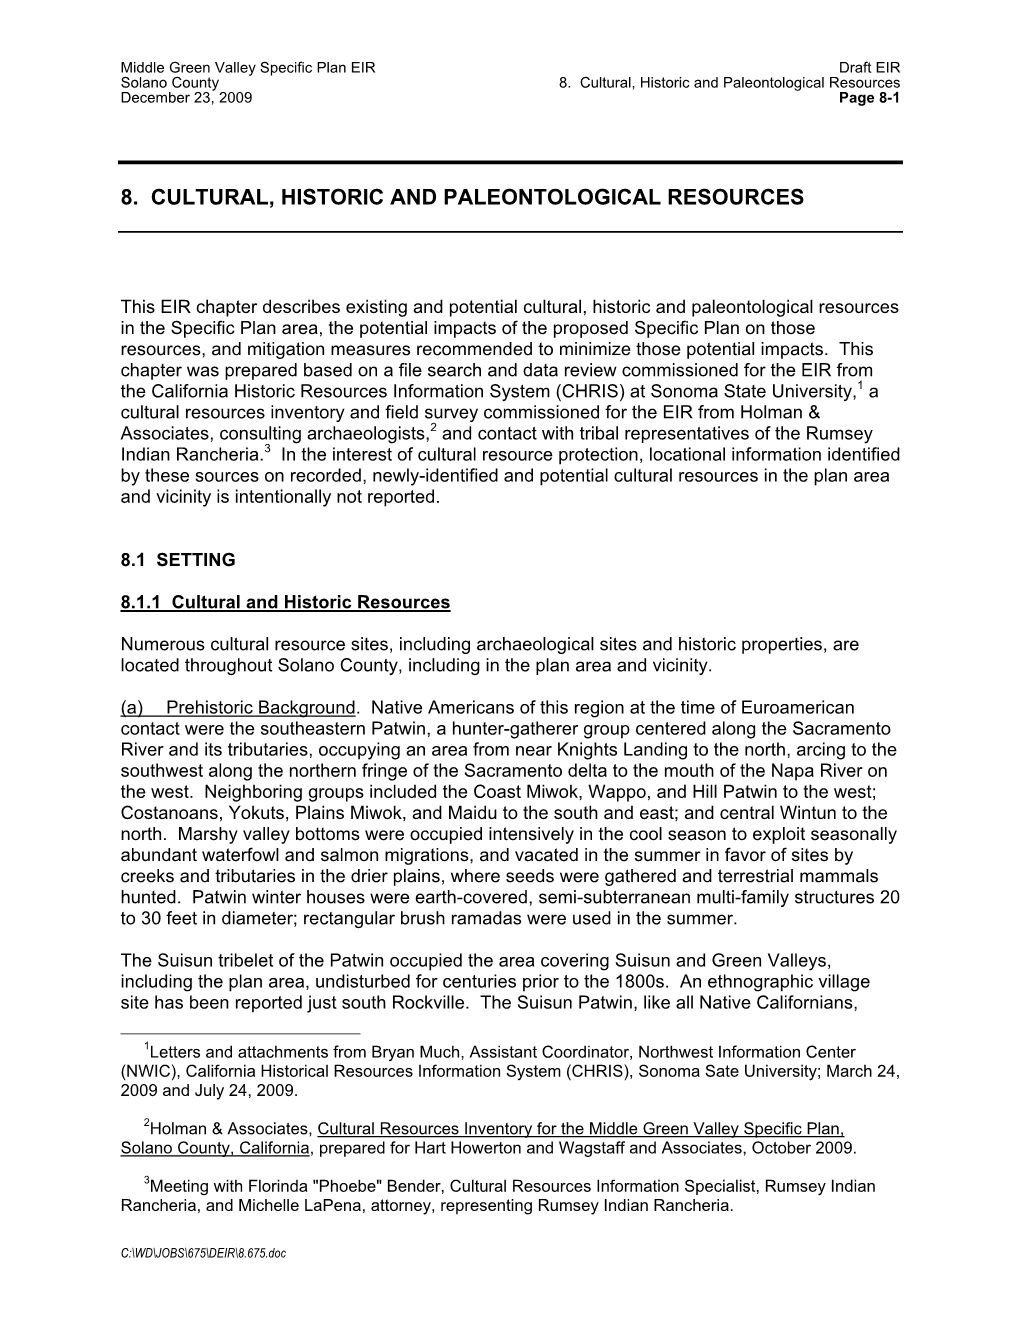 8. Cultural, Historic and Paleontological Resources December 23, 2009 Page 8-1